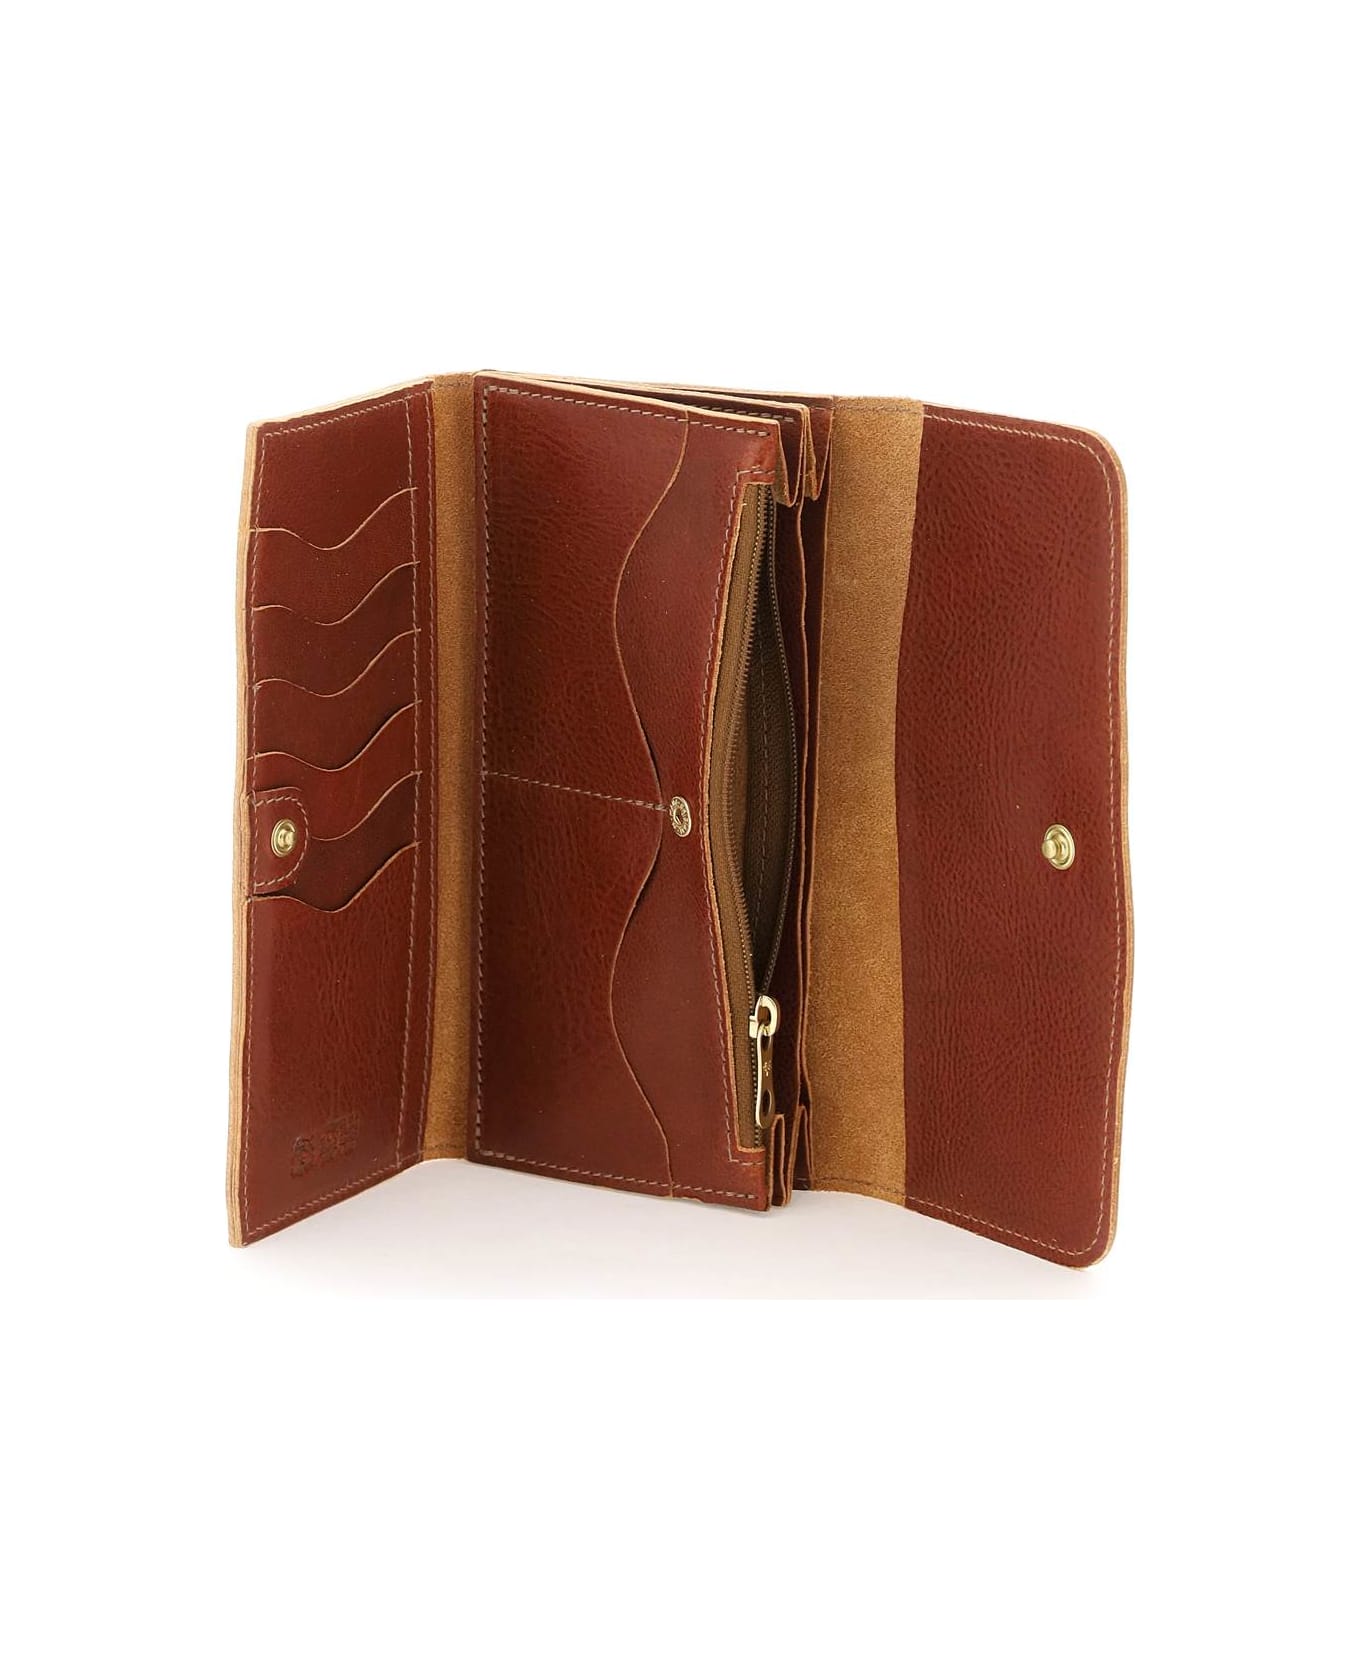 Il Bisonte Leather Wallet - SEPPIA (Brown)